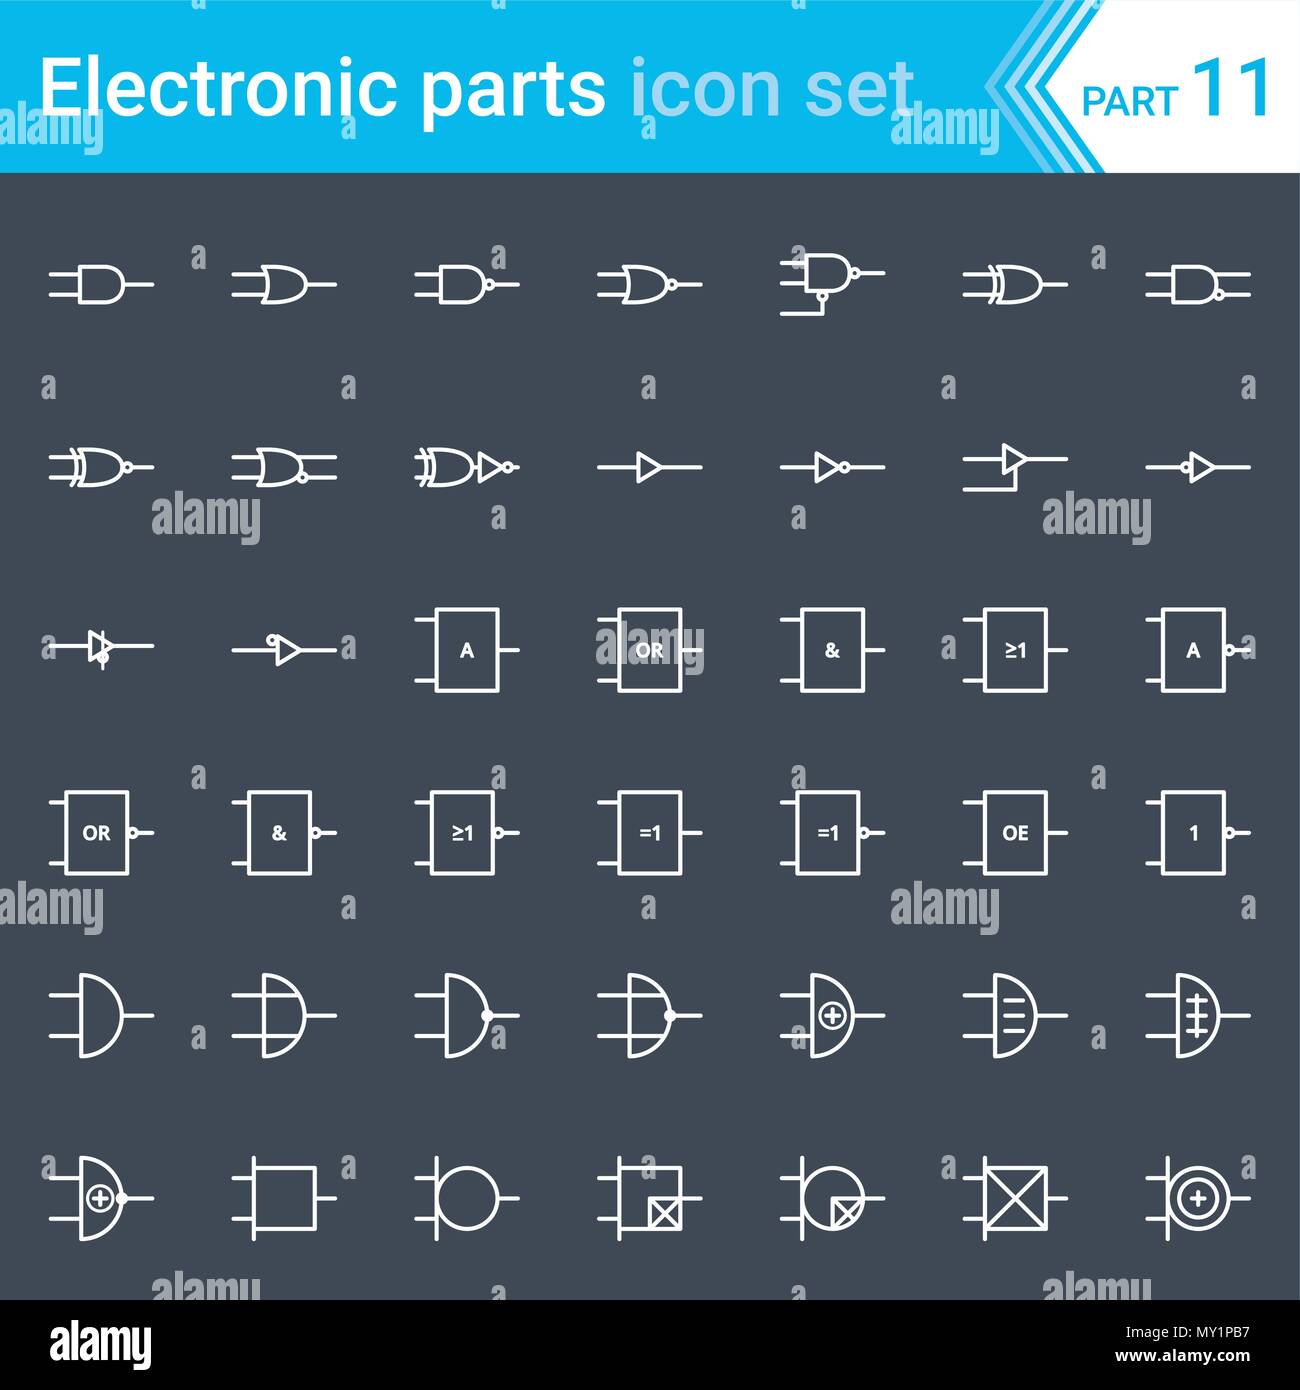 Electric and electronic icons, electric diagram symbols. Digital electronics, logic gate (ansi system, british system, din system, nema system). Stock Vector